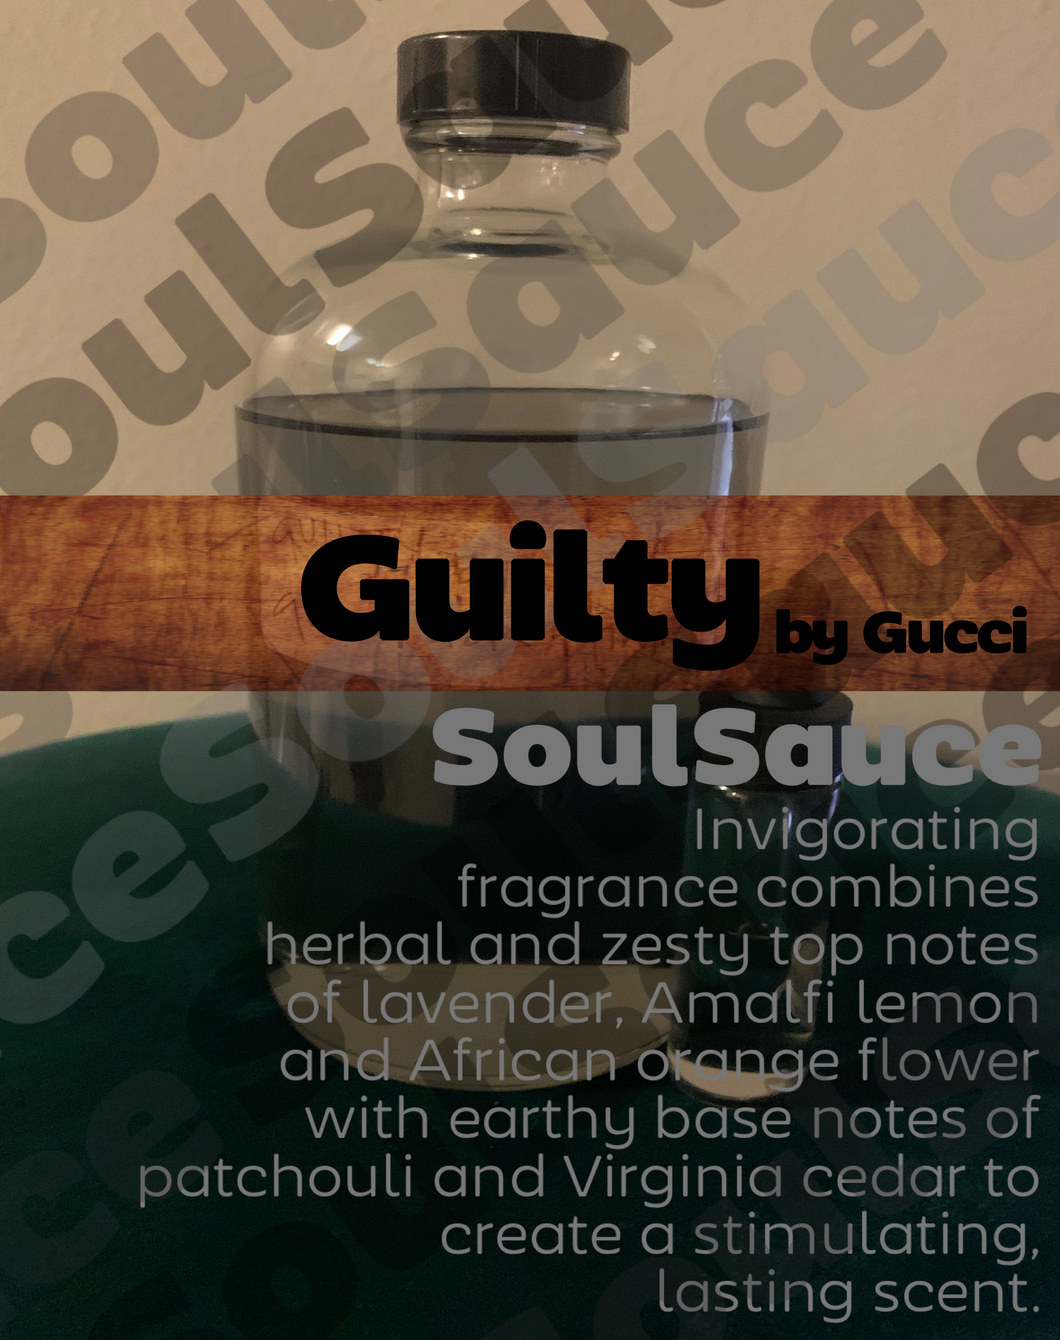 Guilty by Gucci for Him Perfumed Body Oil by SoulSauce - Buy 4, Get 5